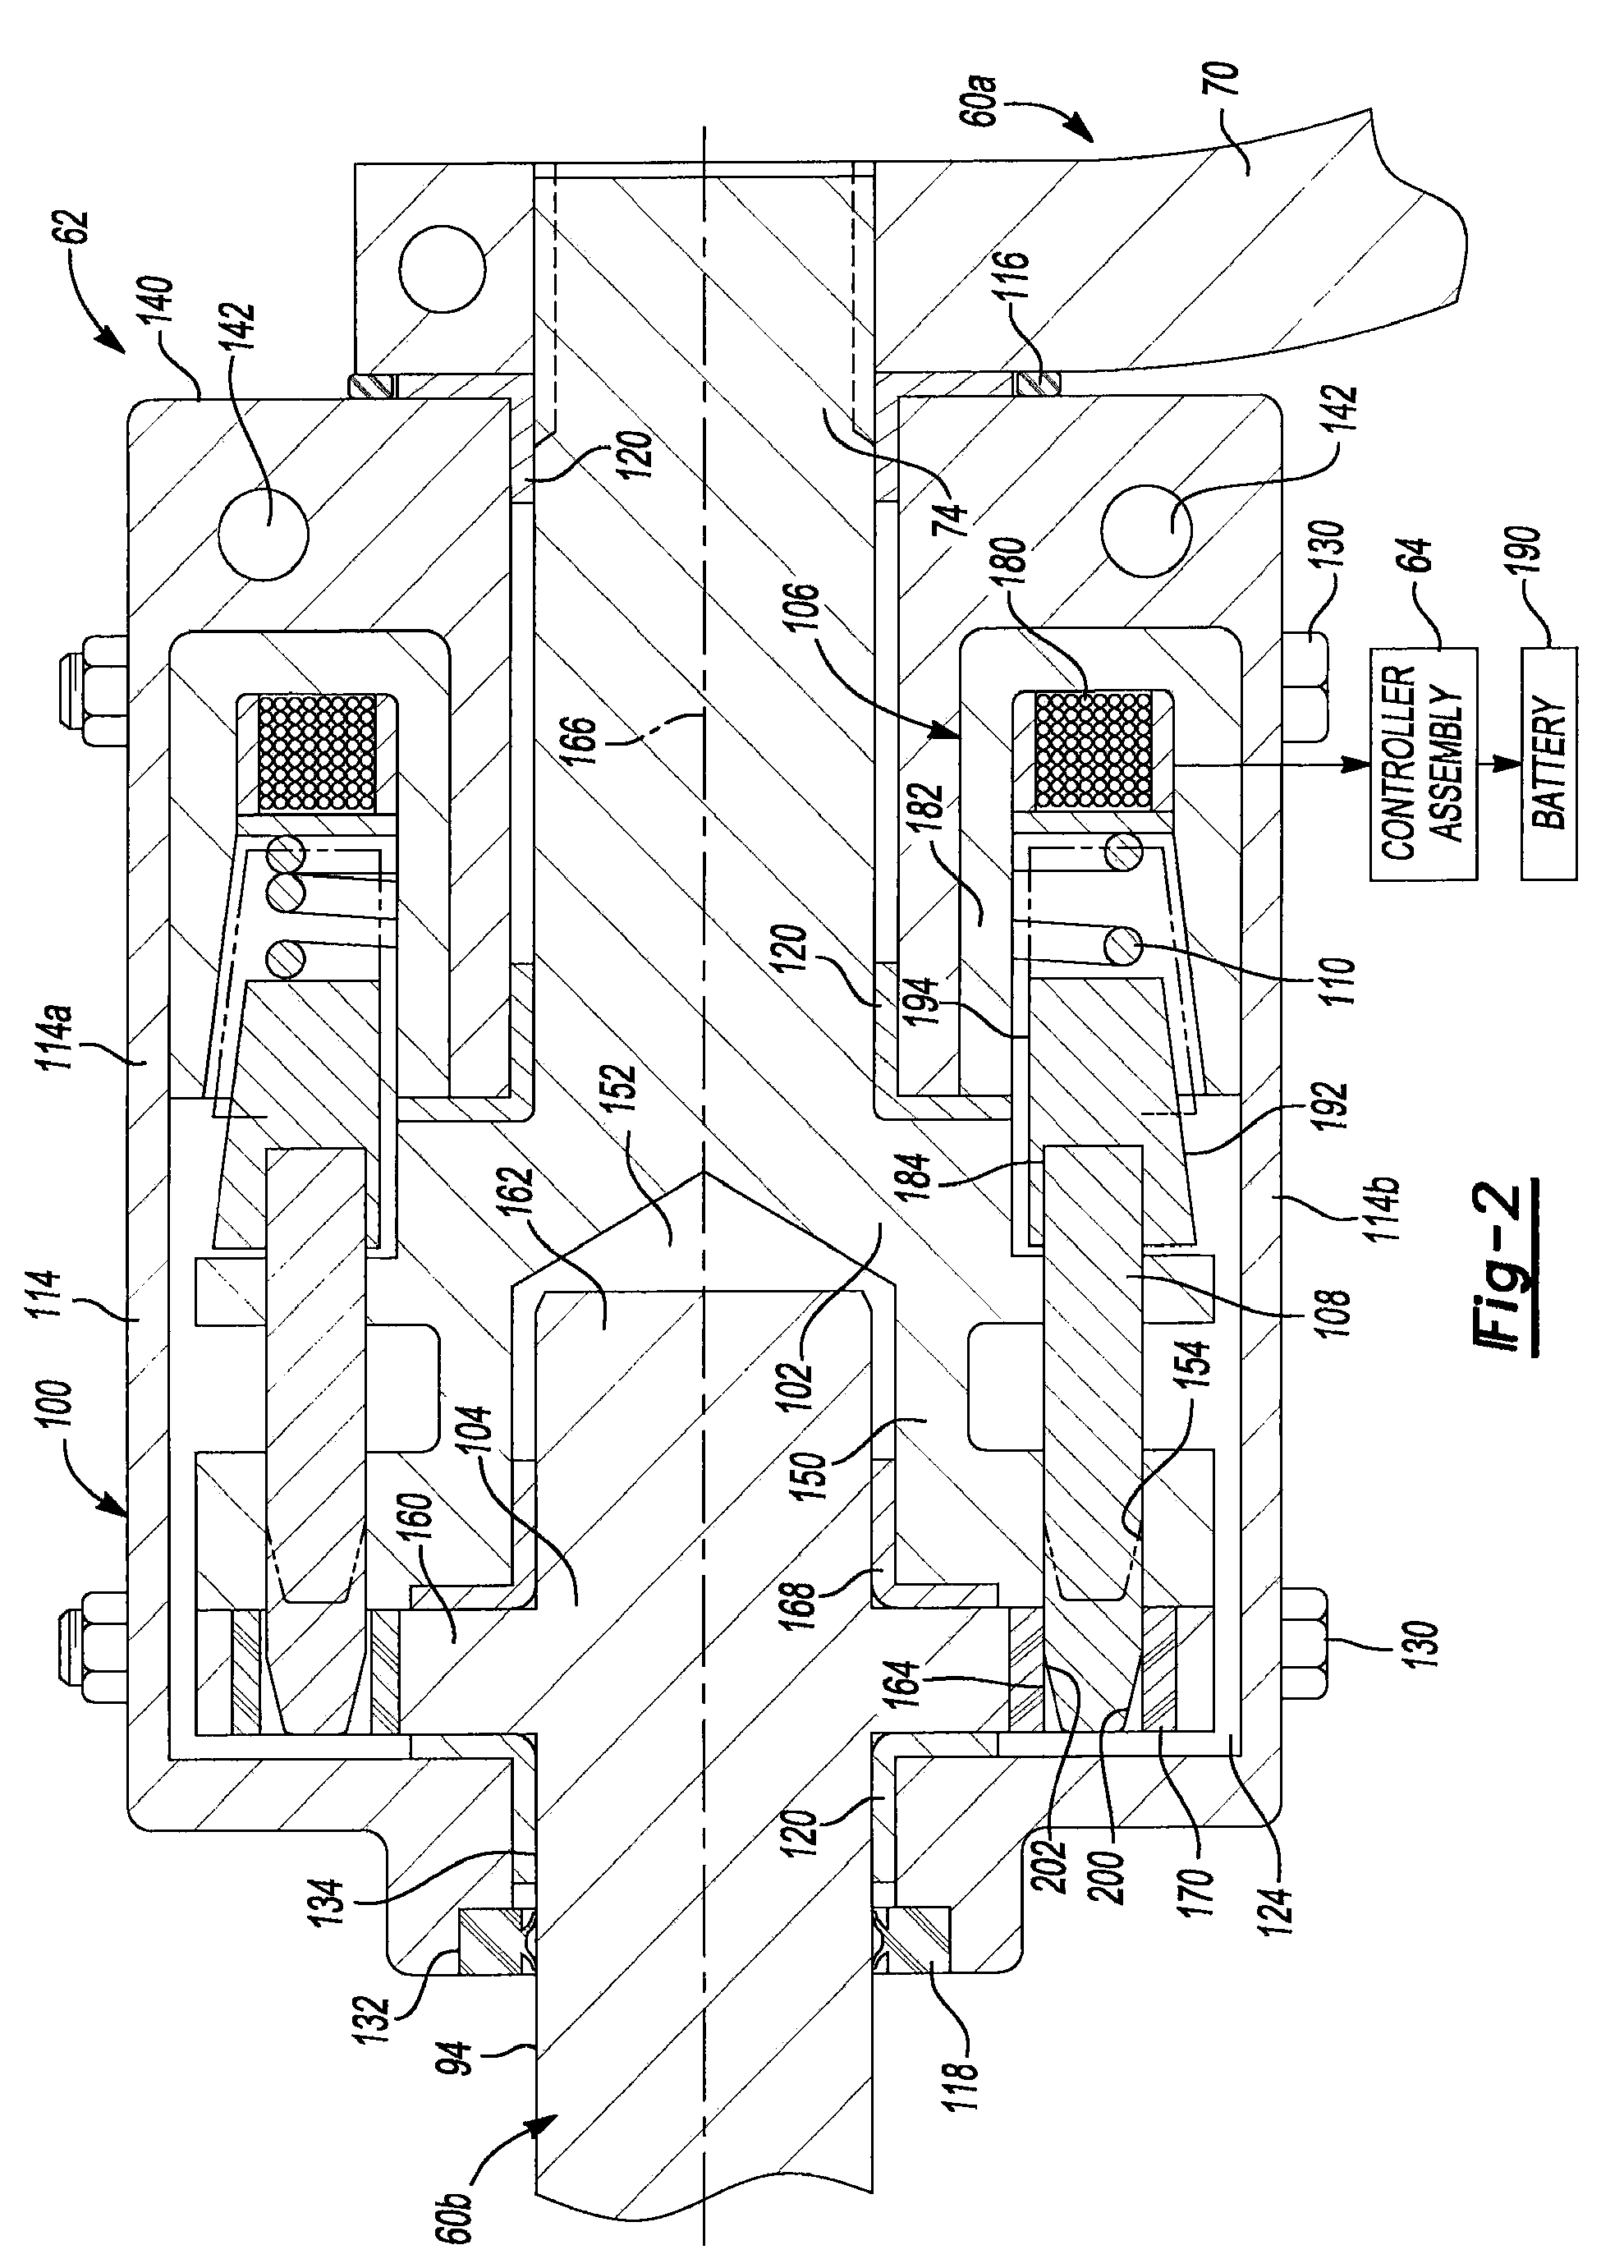 Actuator for disconnectable stabilizer bar system